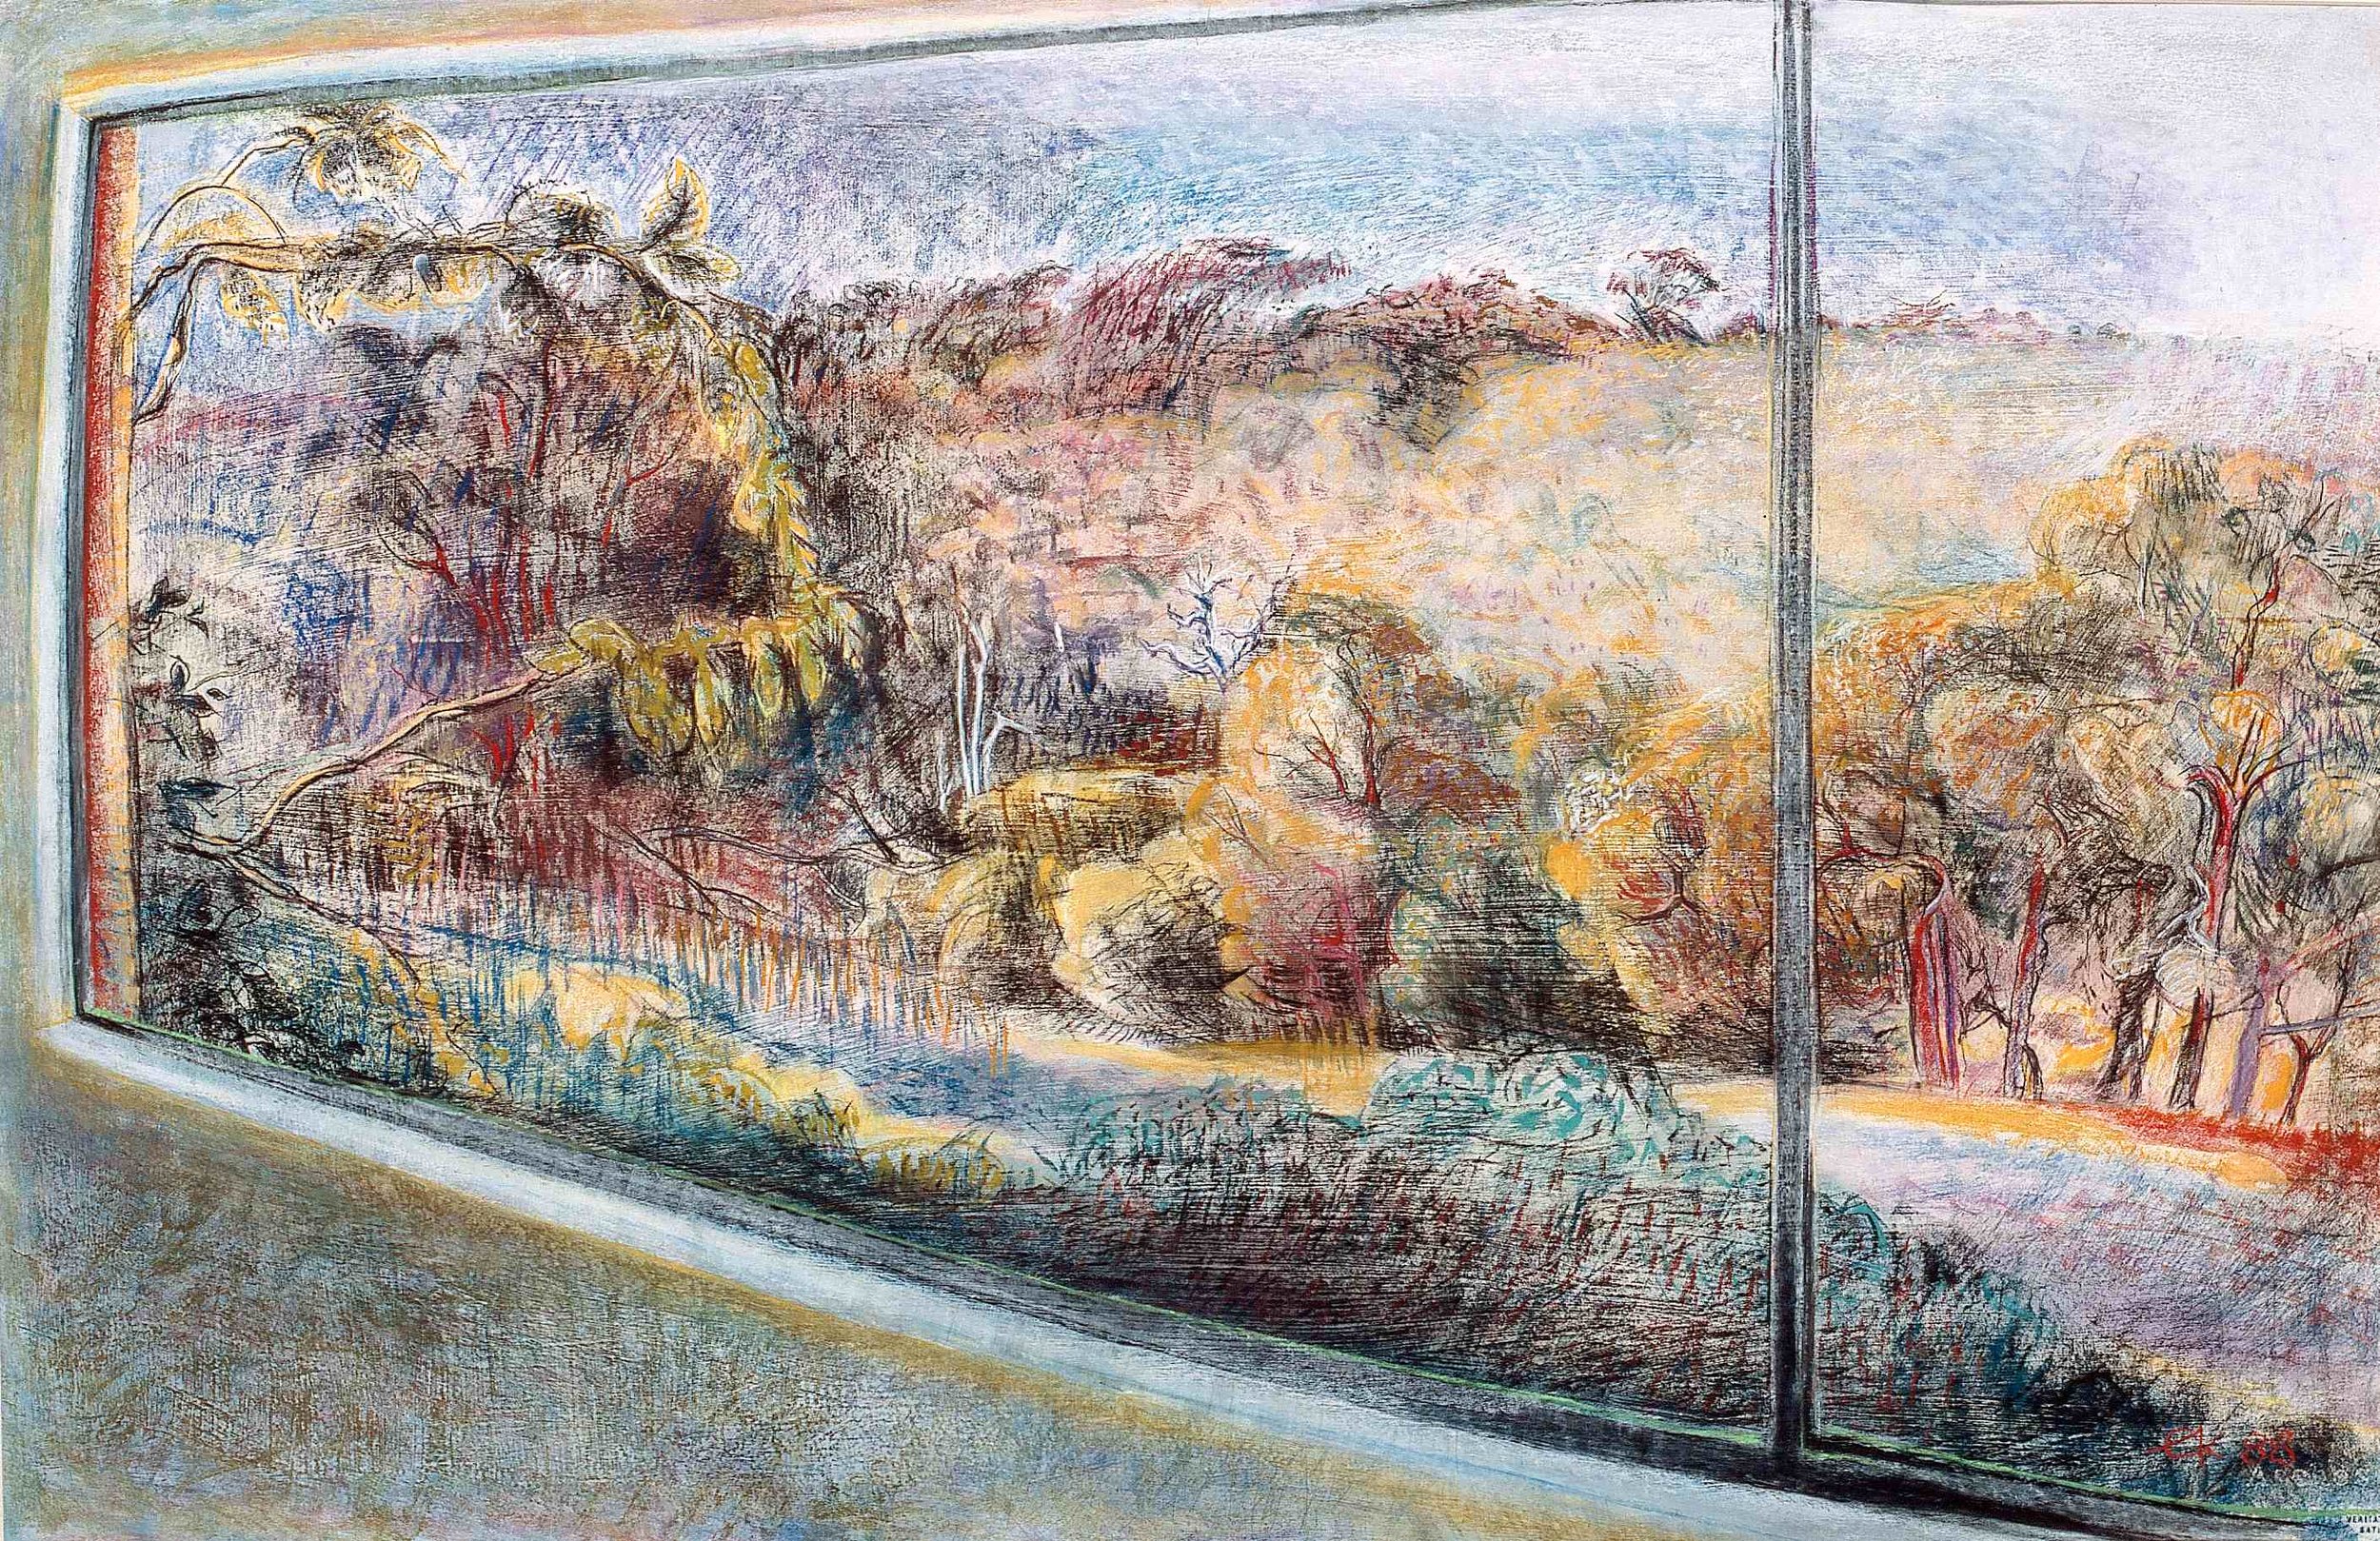 Margaret River Studio Window 3 1988, pastel and gessoed paper, 57 x 76cm. Private Collection 